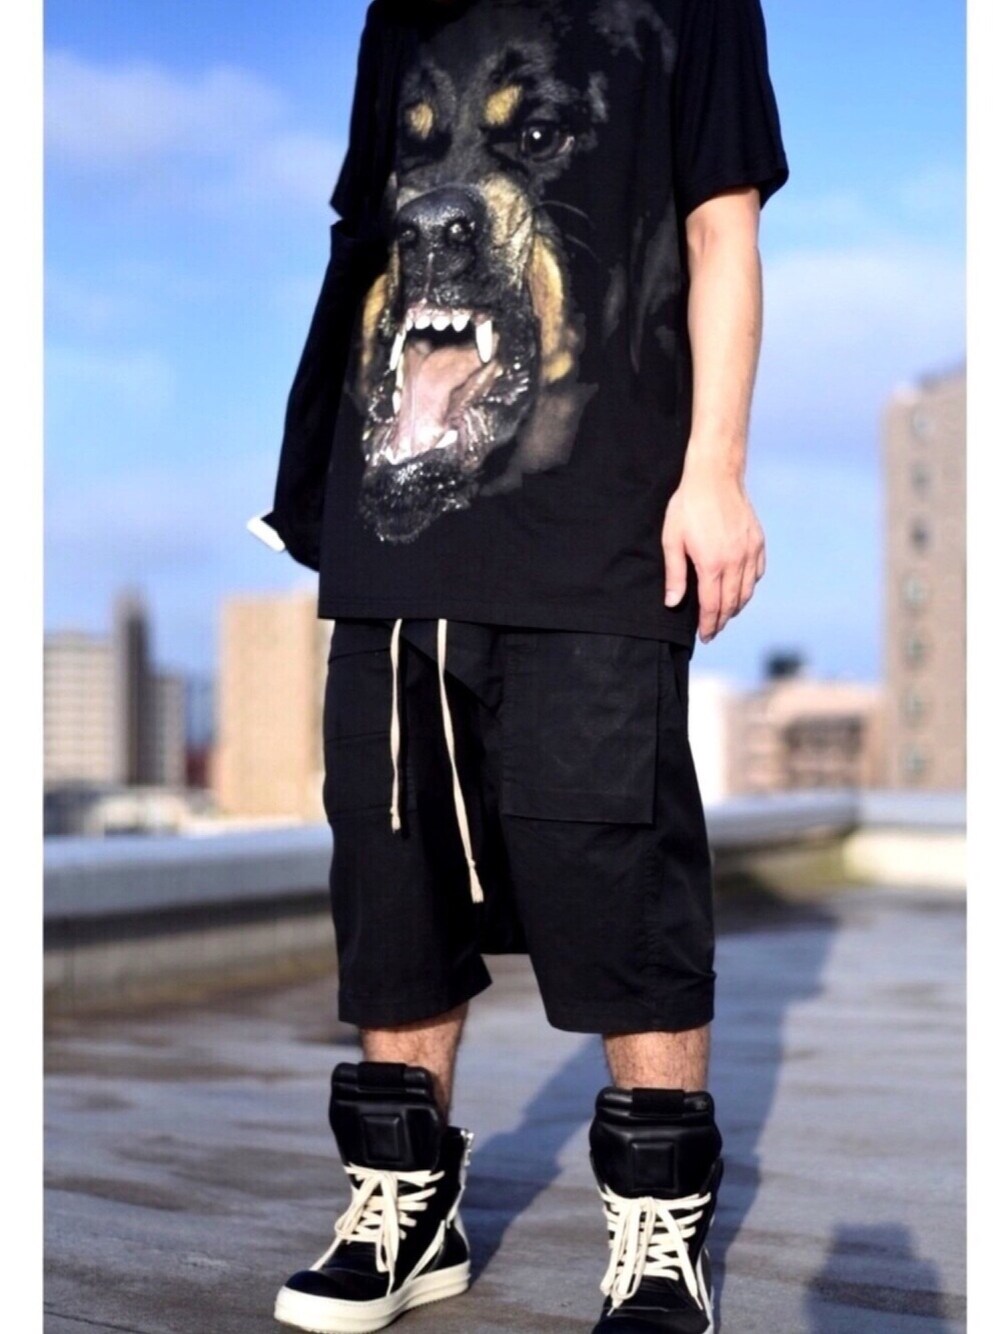 14aw givenchy カットソー